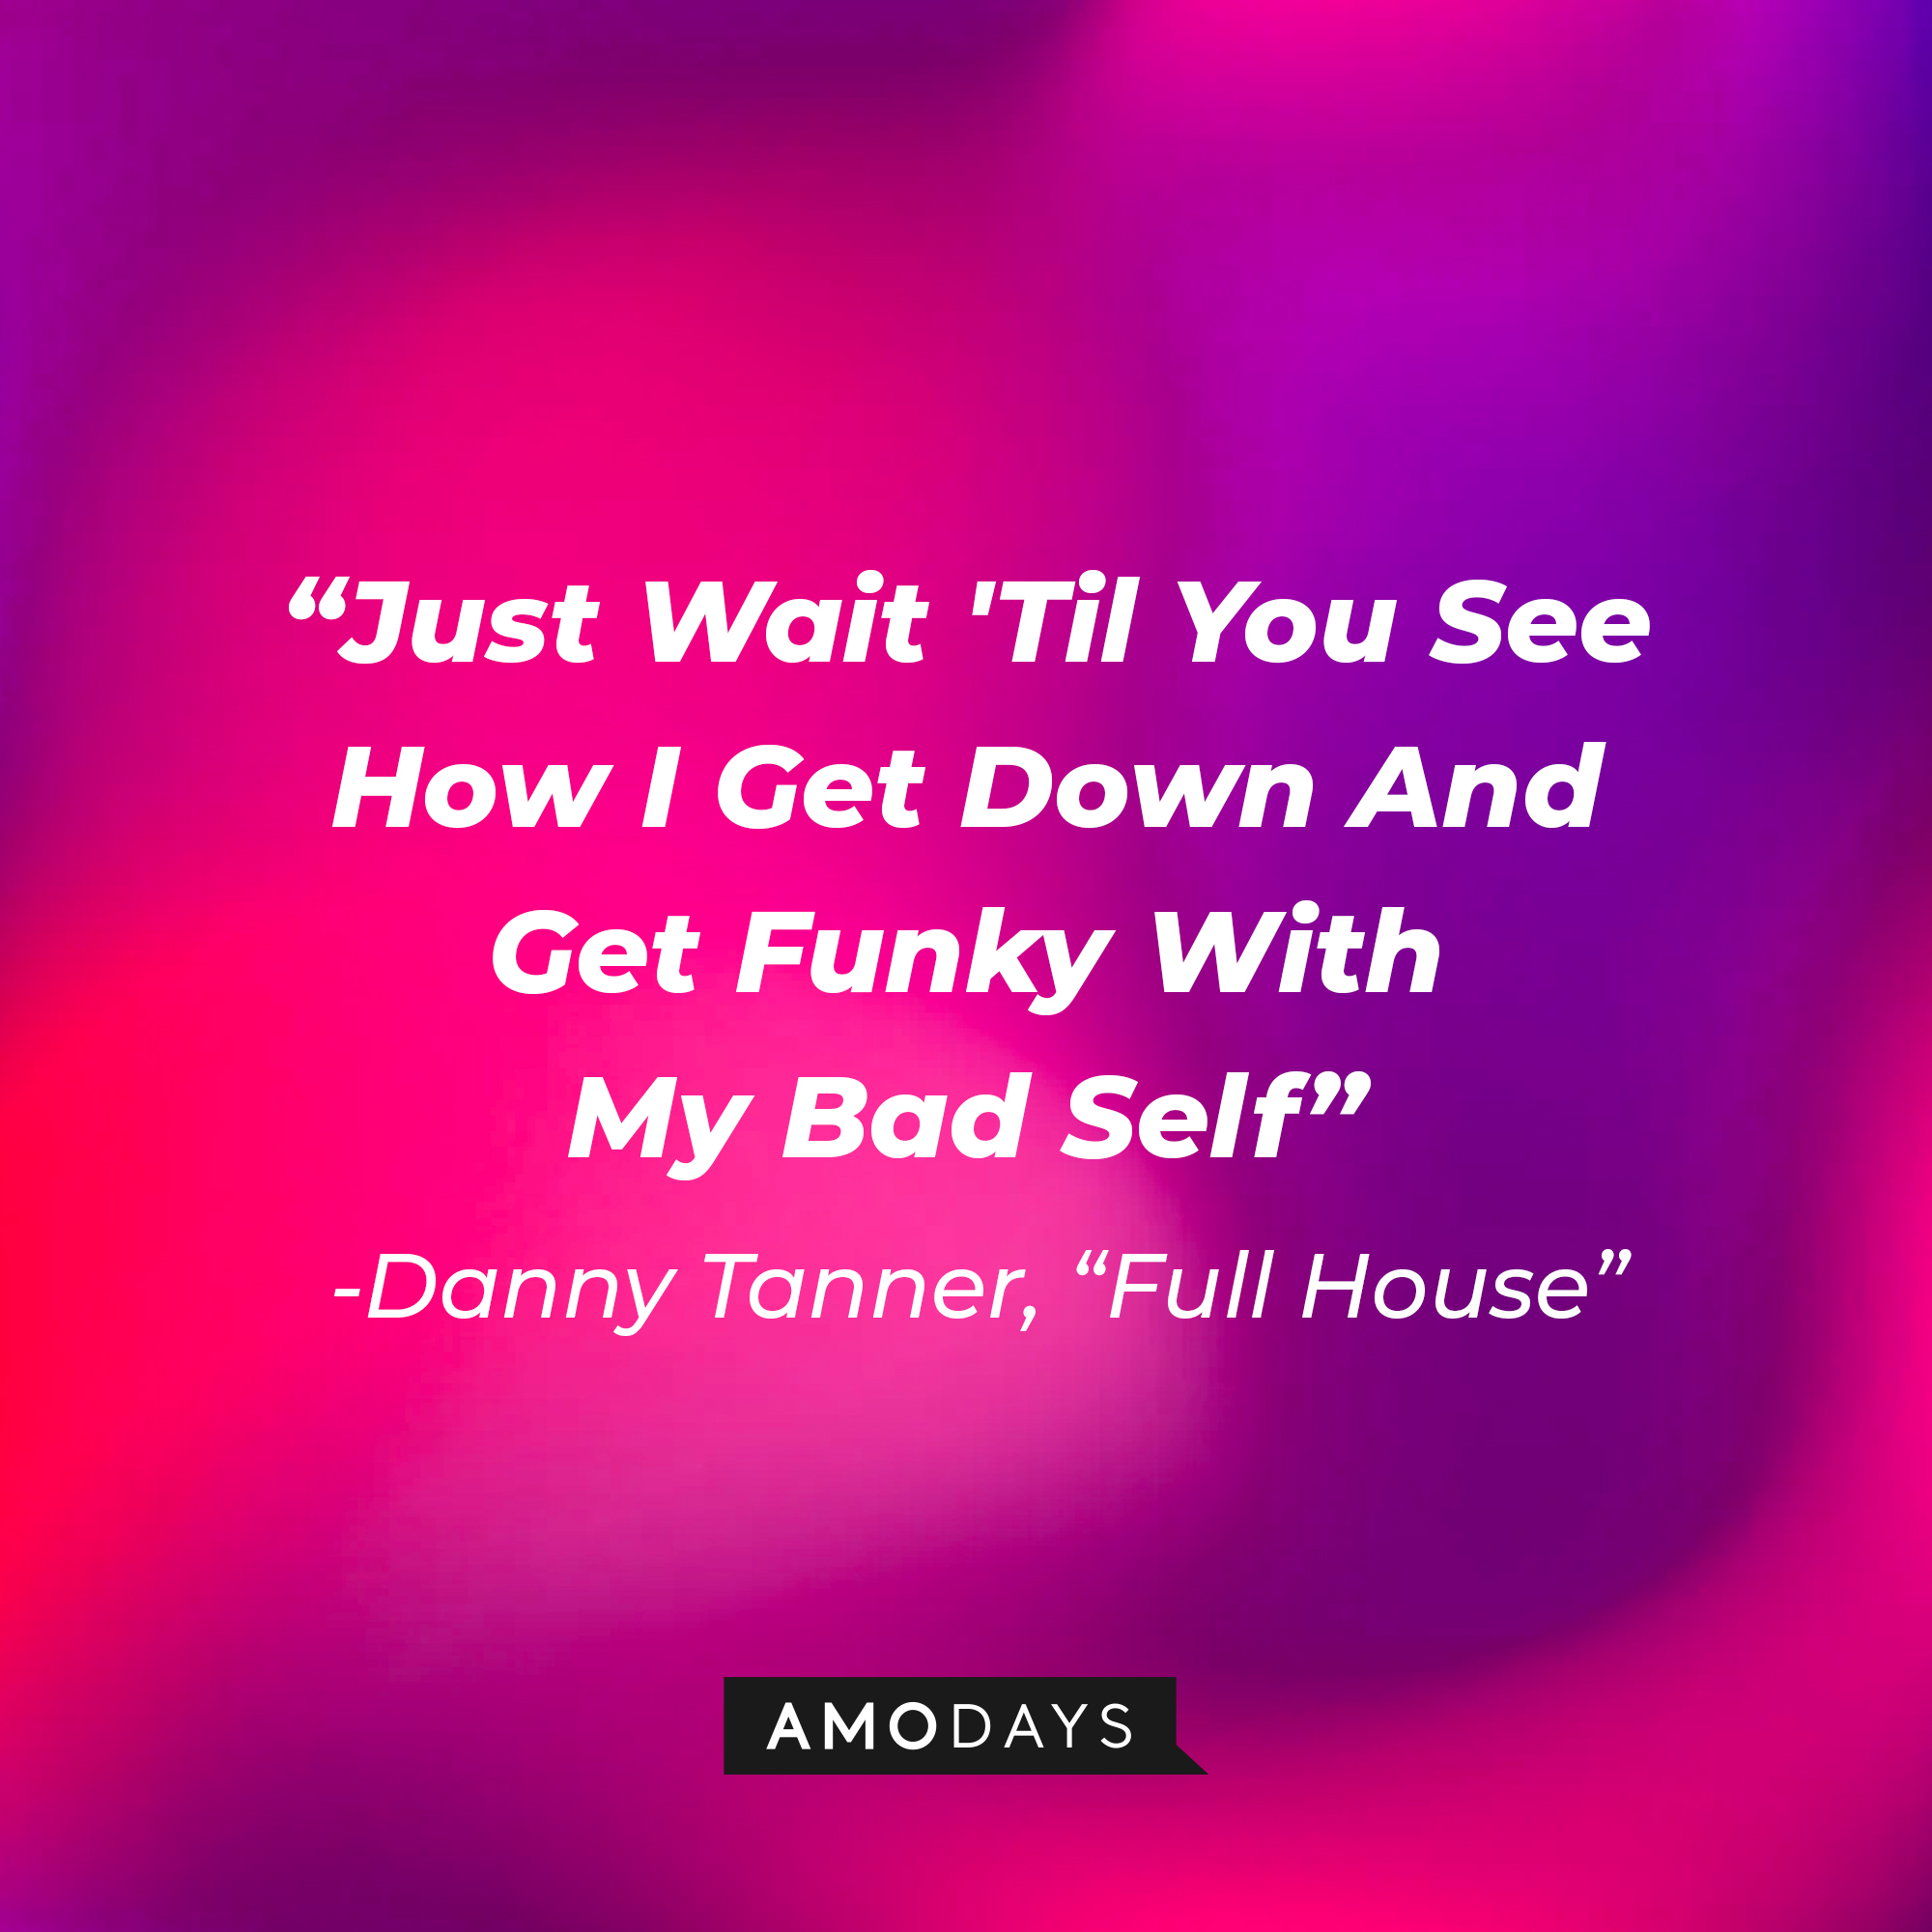 Danny Tanner's quote from "Full House" : "Just Wait 'Til You See How I Get Down And Get Funky With My Bad Self" | Source: facebook.com/FullHouseTVshow